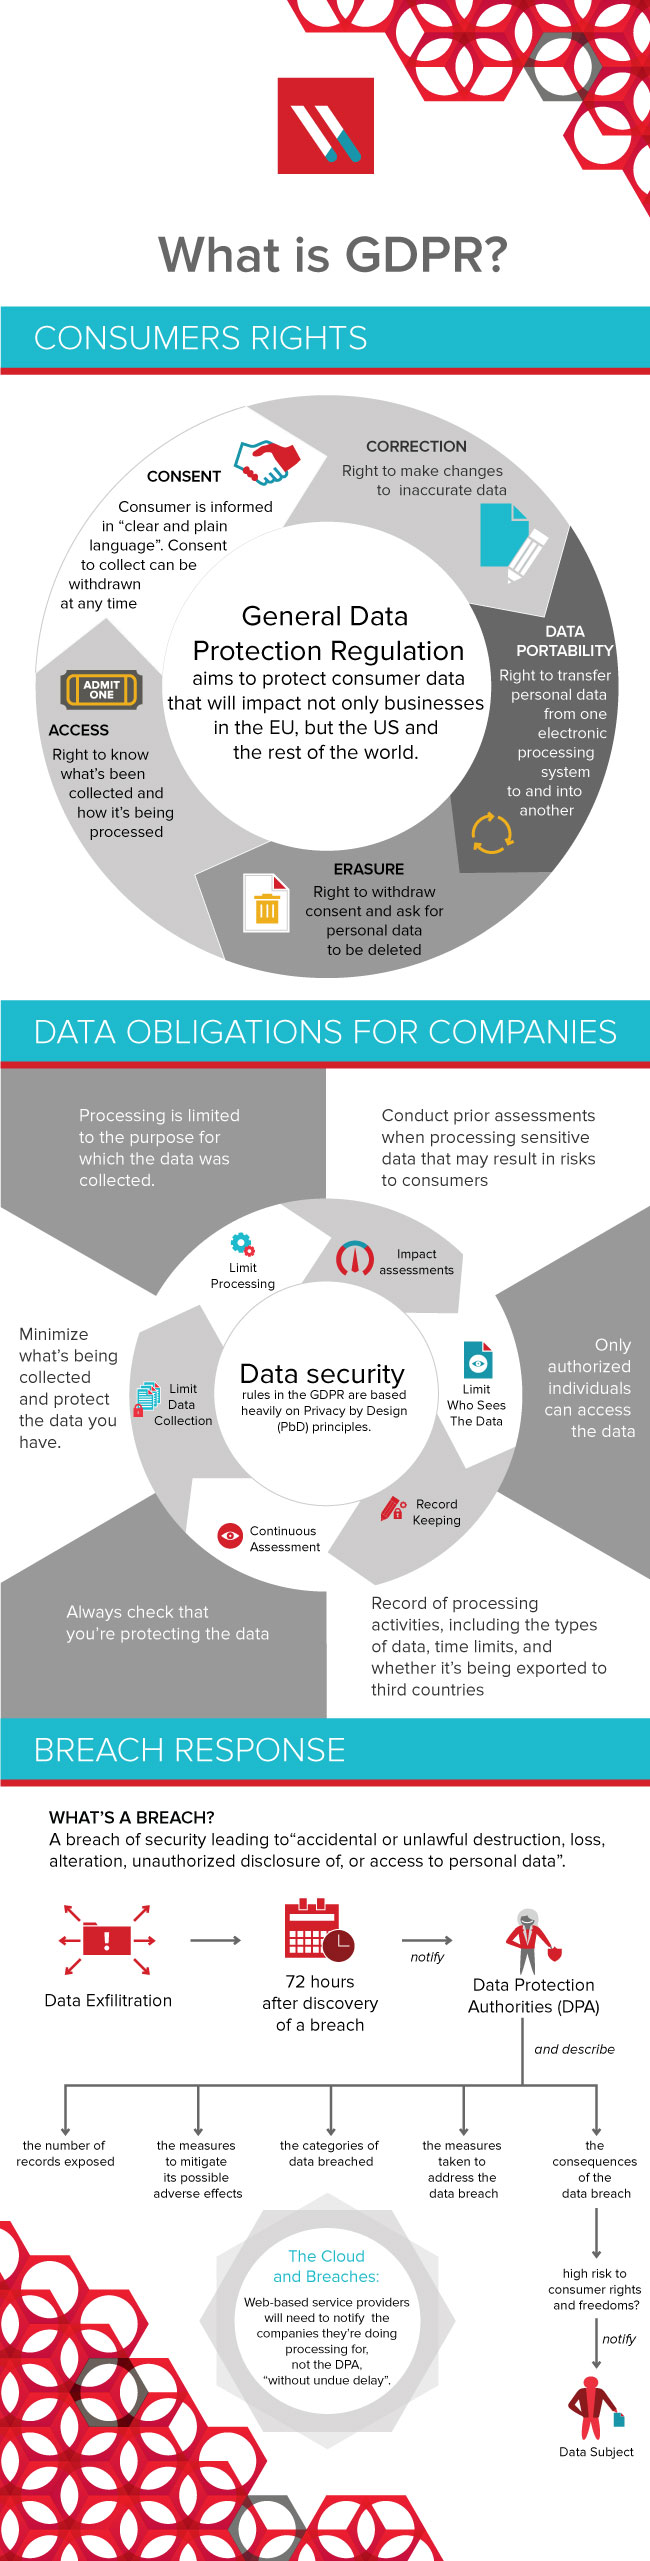 GDPR infographic by Varonis - source and more information